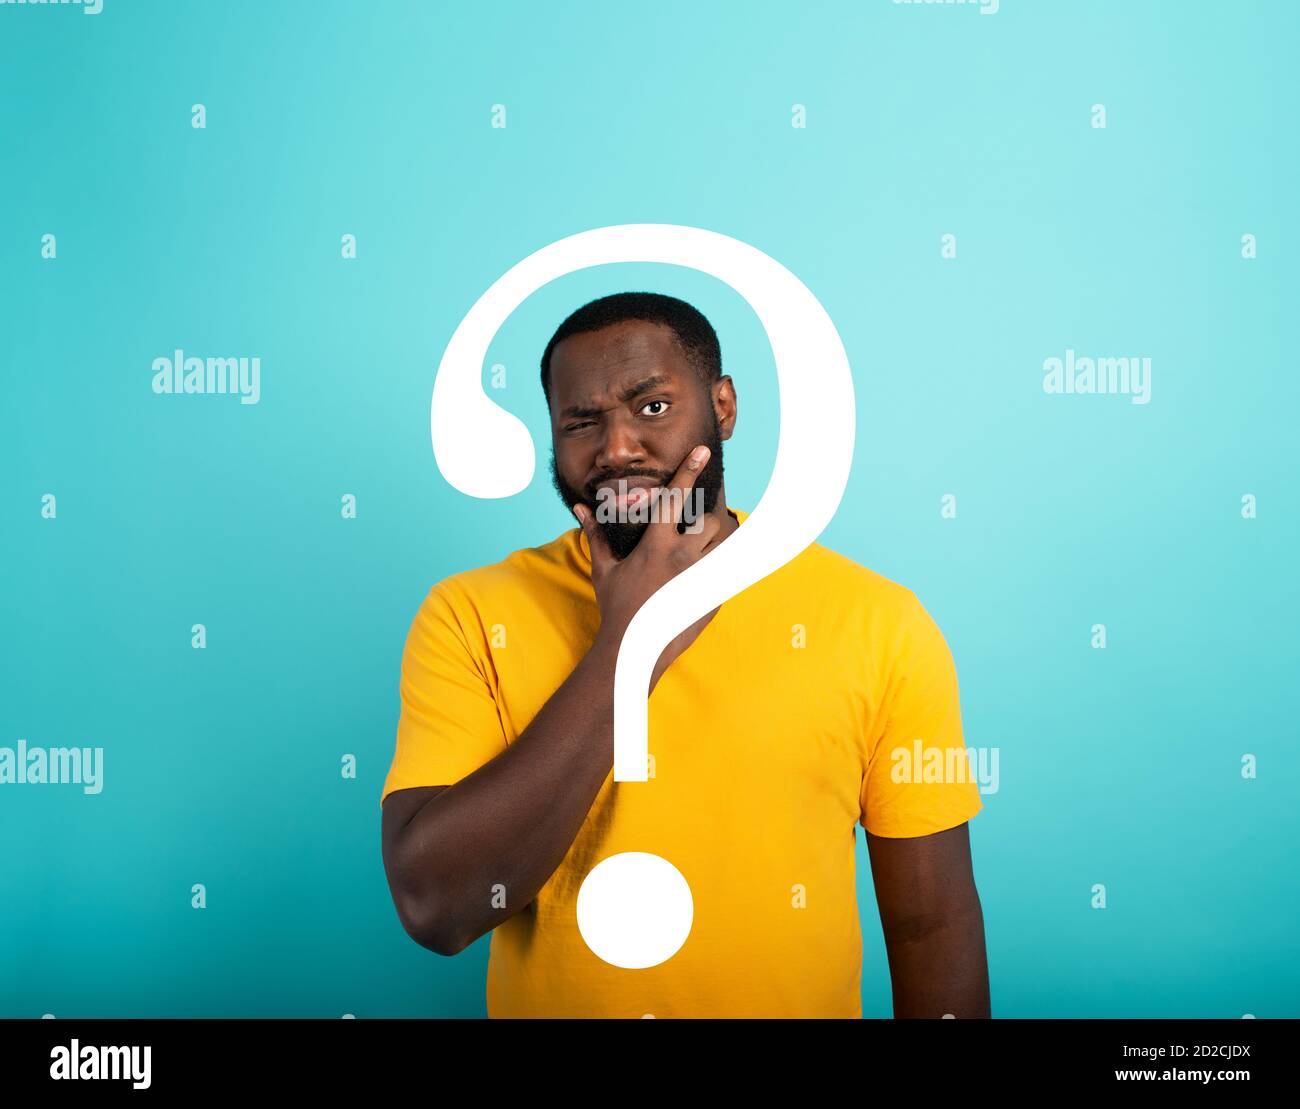 Confused Man has a big question to ask. Concept of options, confusion, decision. Stock Photo